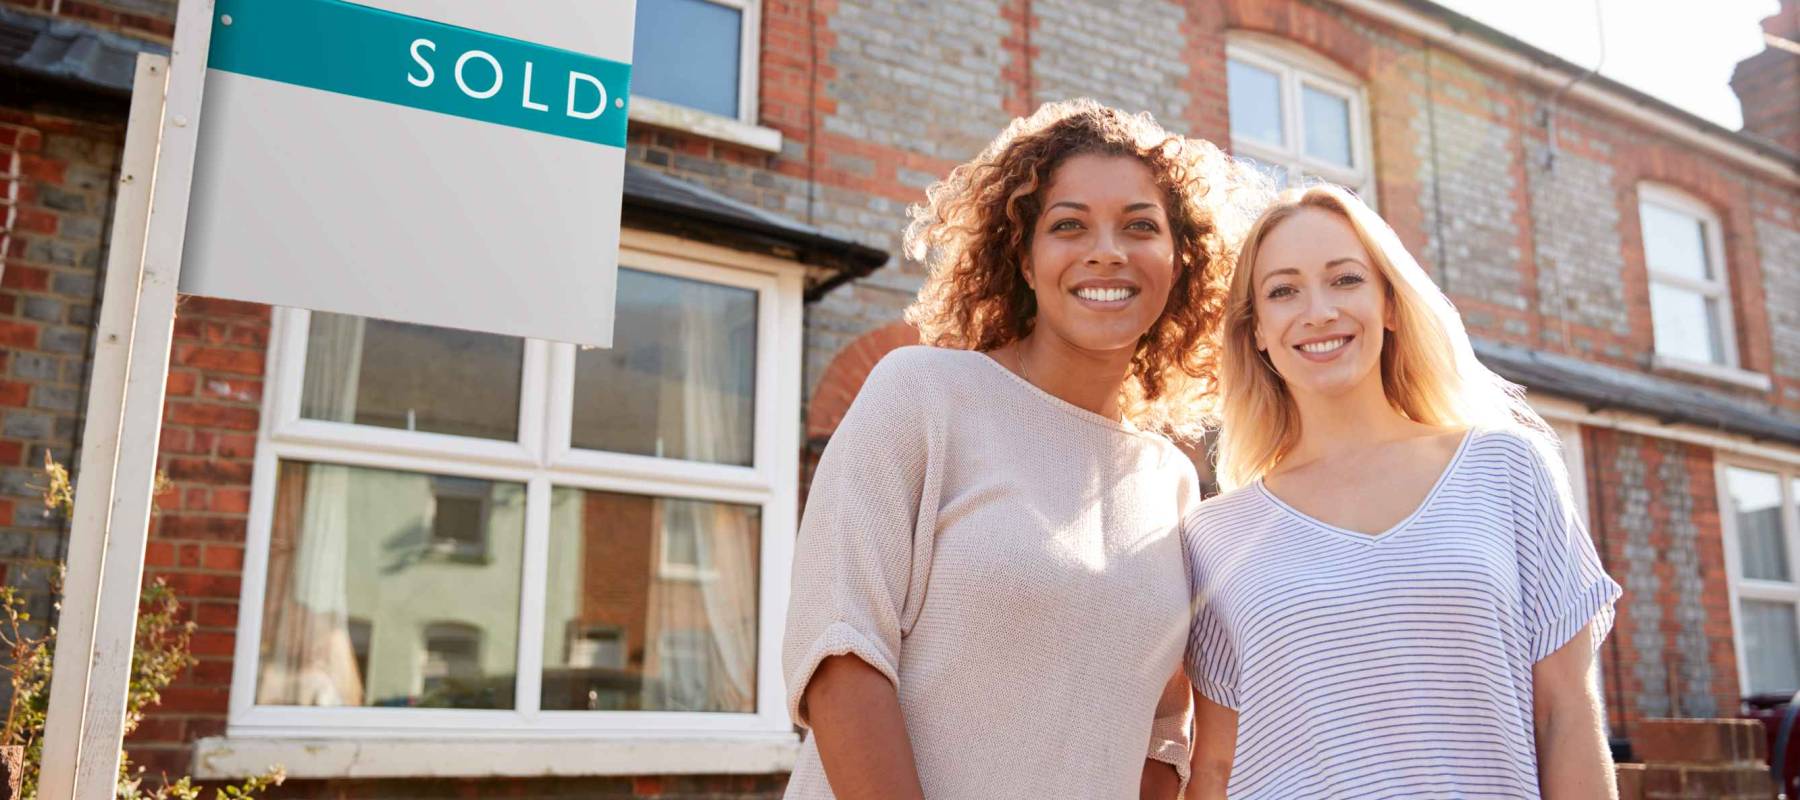 Portrait Of Two Women Standing Outside New Home With Sold Sign